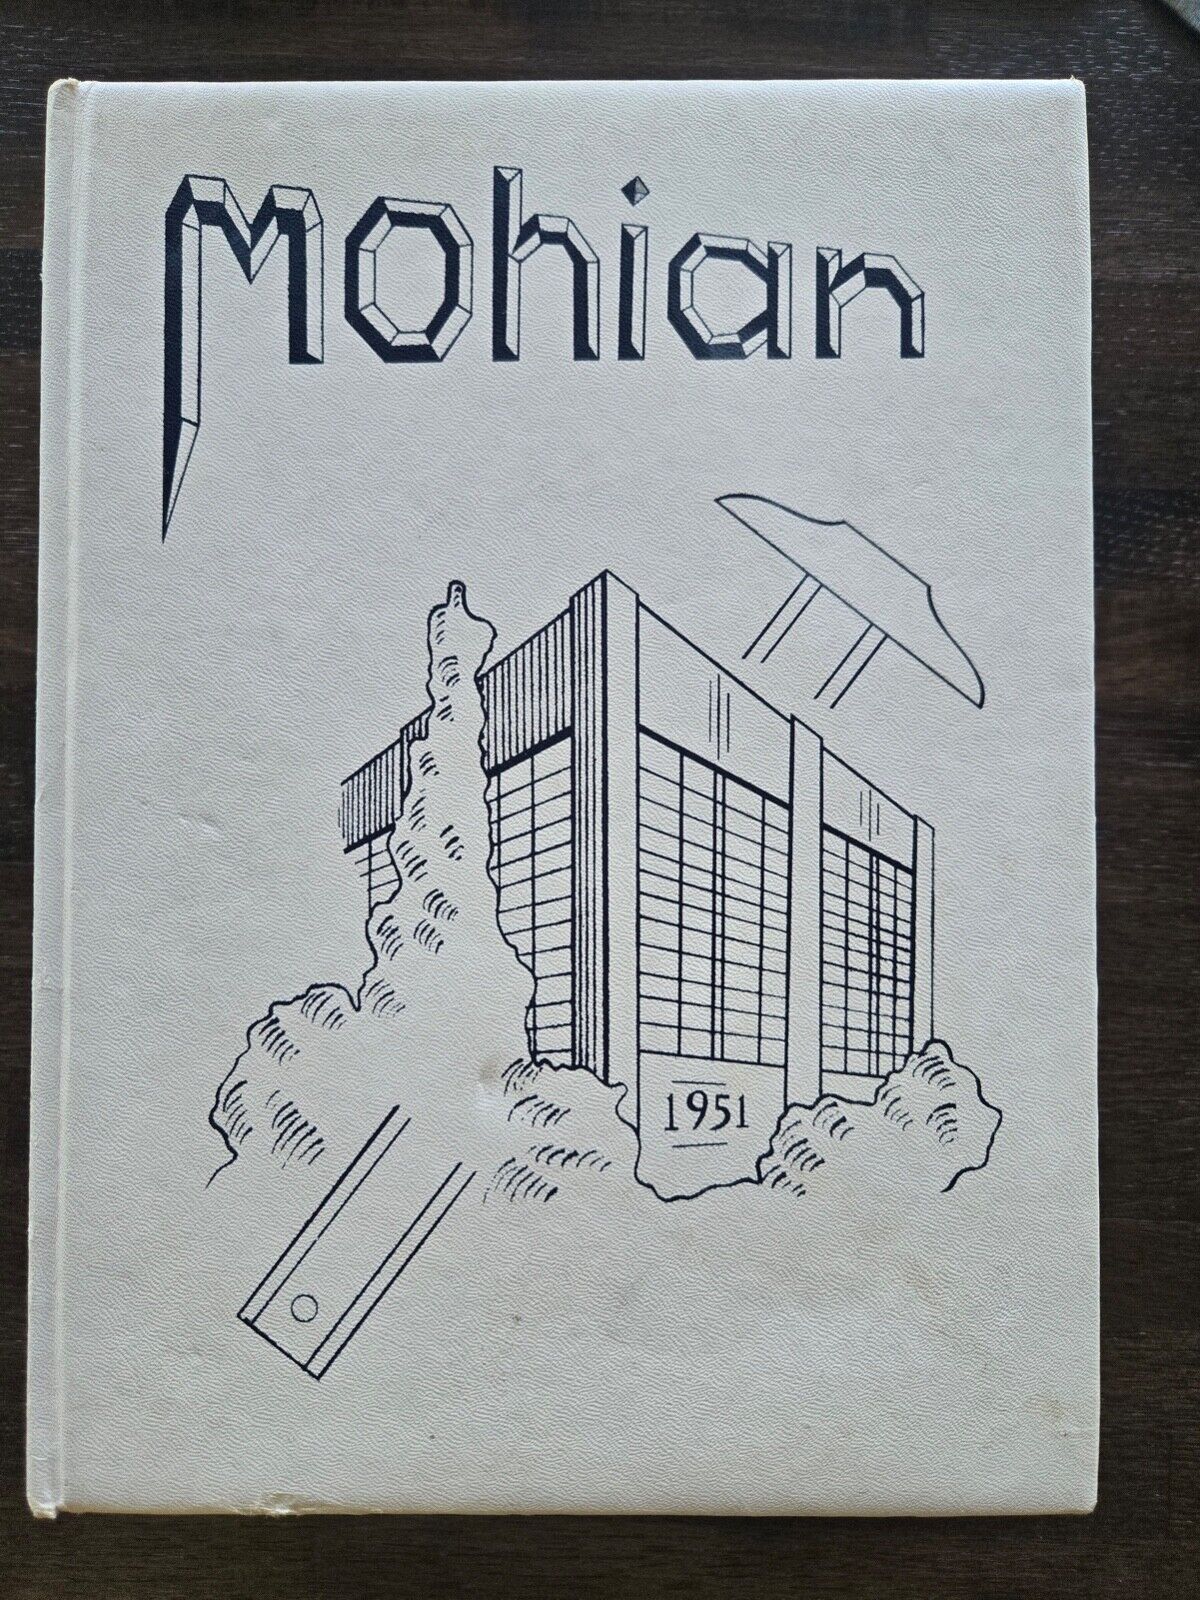 1951 Mohian Yearbook, Mound Consolidated High School, Mound MN